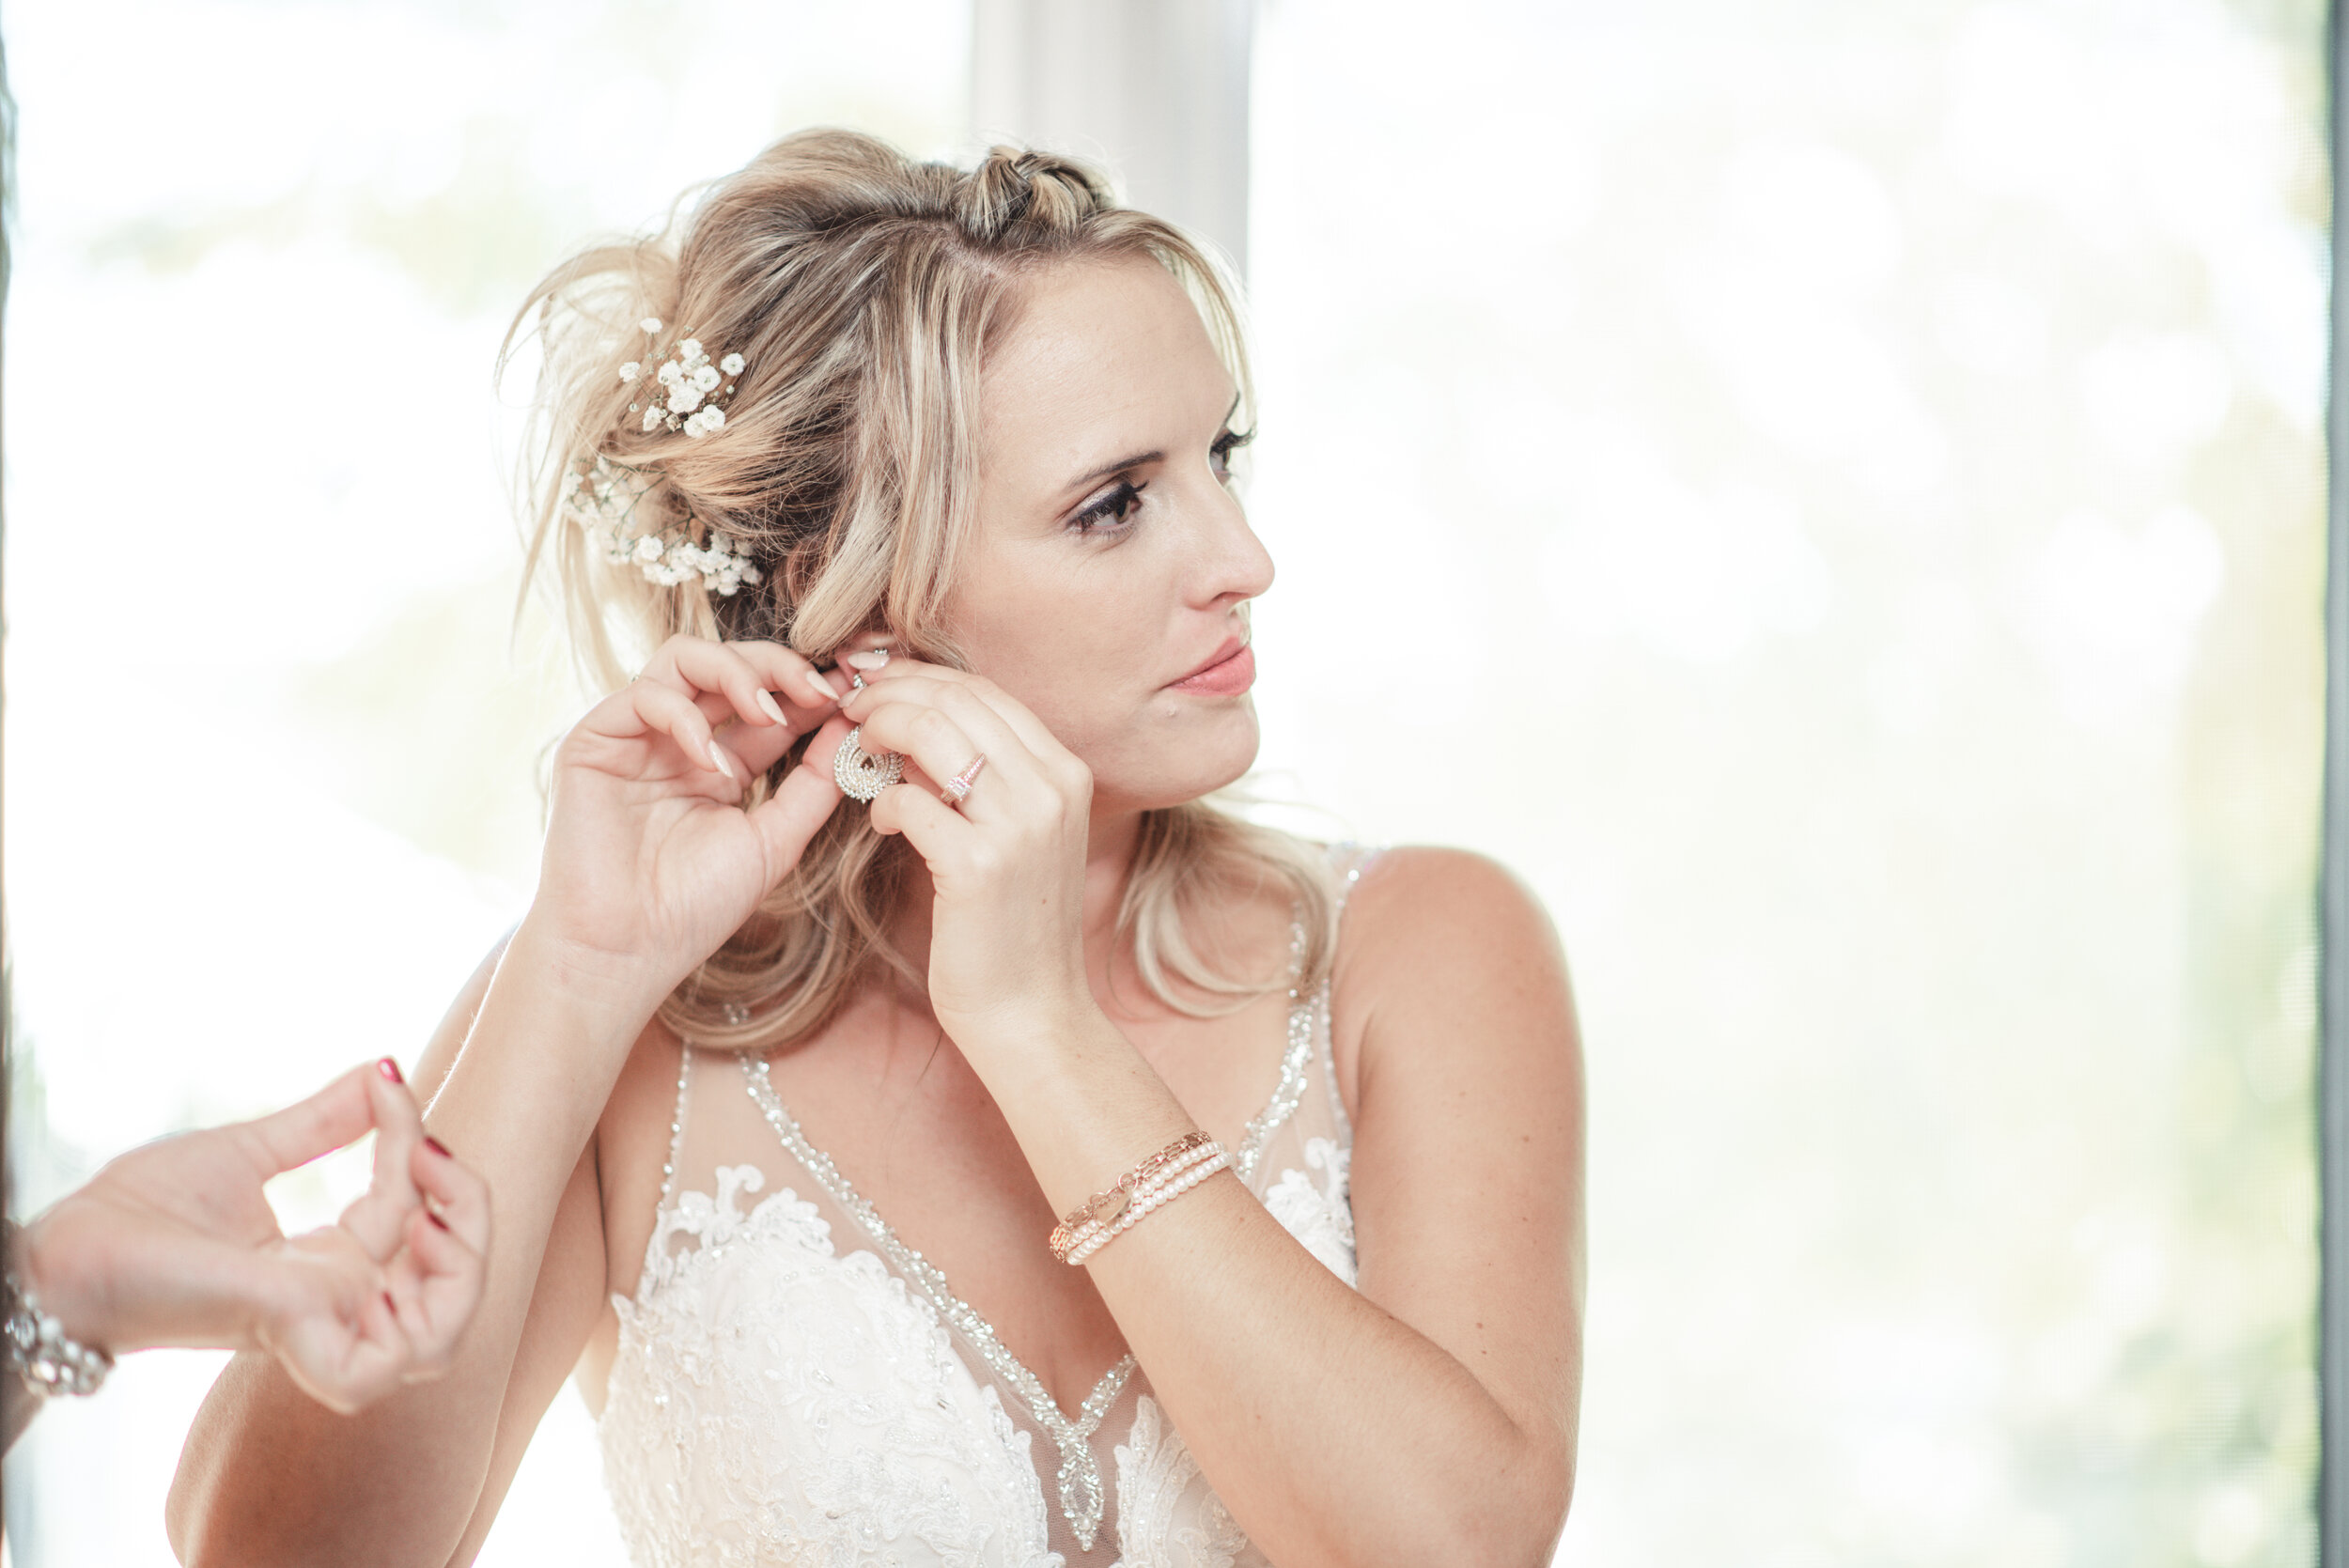 Finishing touches for the beautiful bride - eTangPhotography.com